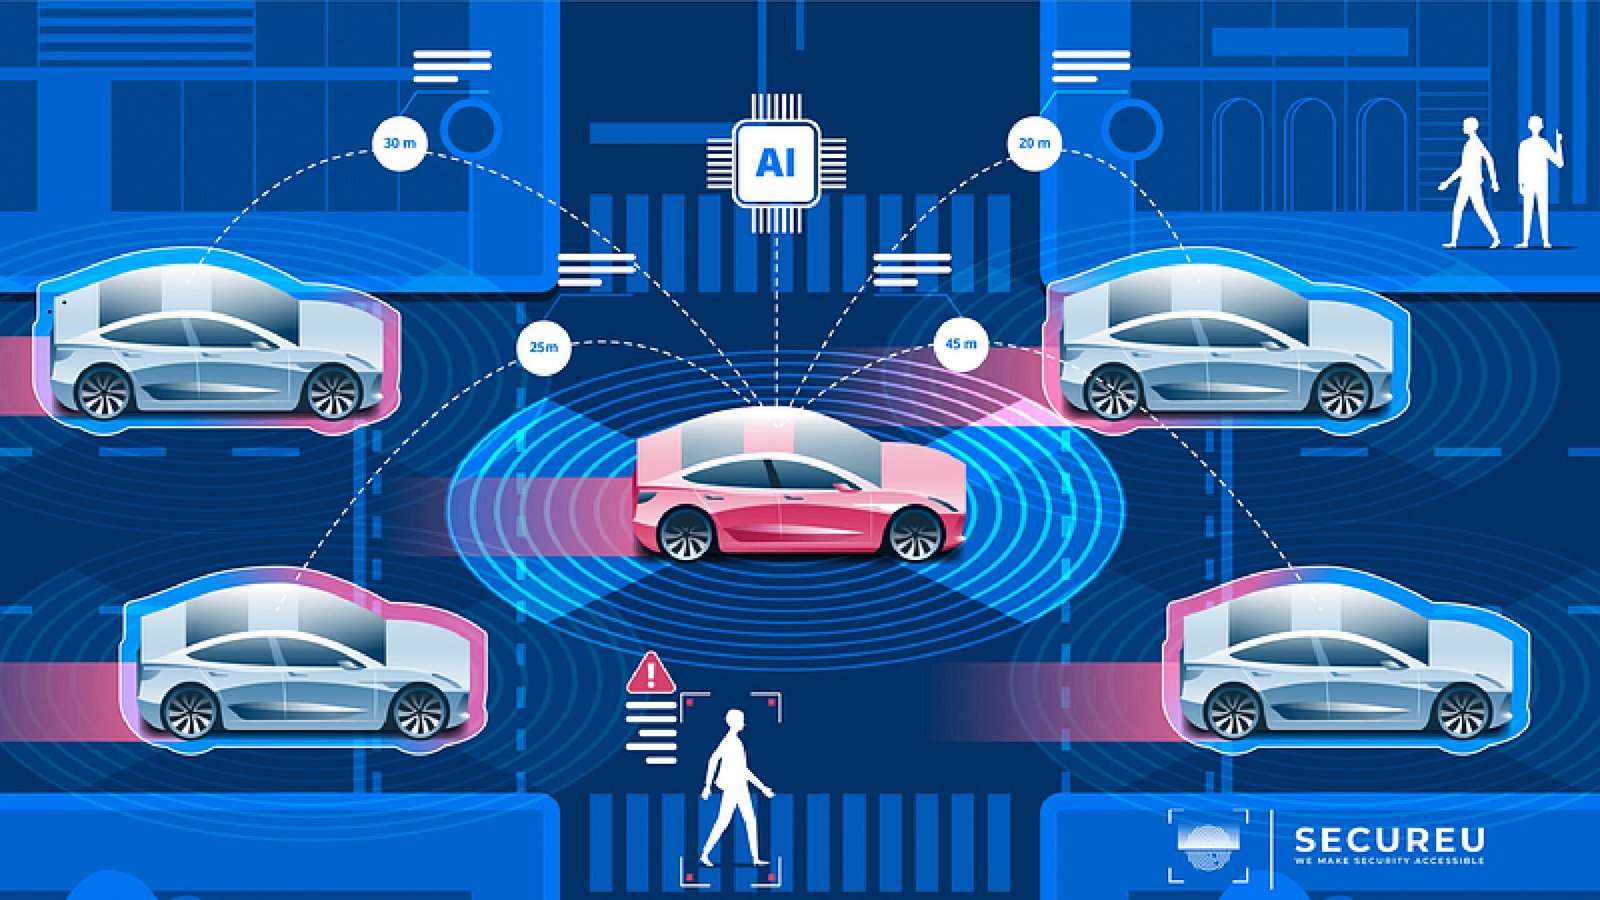 Cybersecurity Standards for Automotive: What are They and Why are They Important?